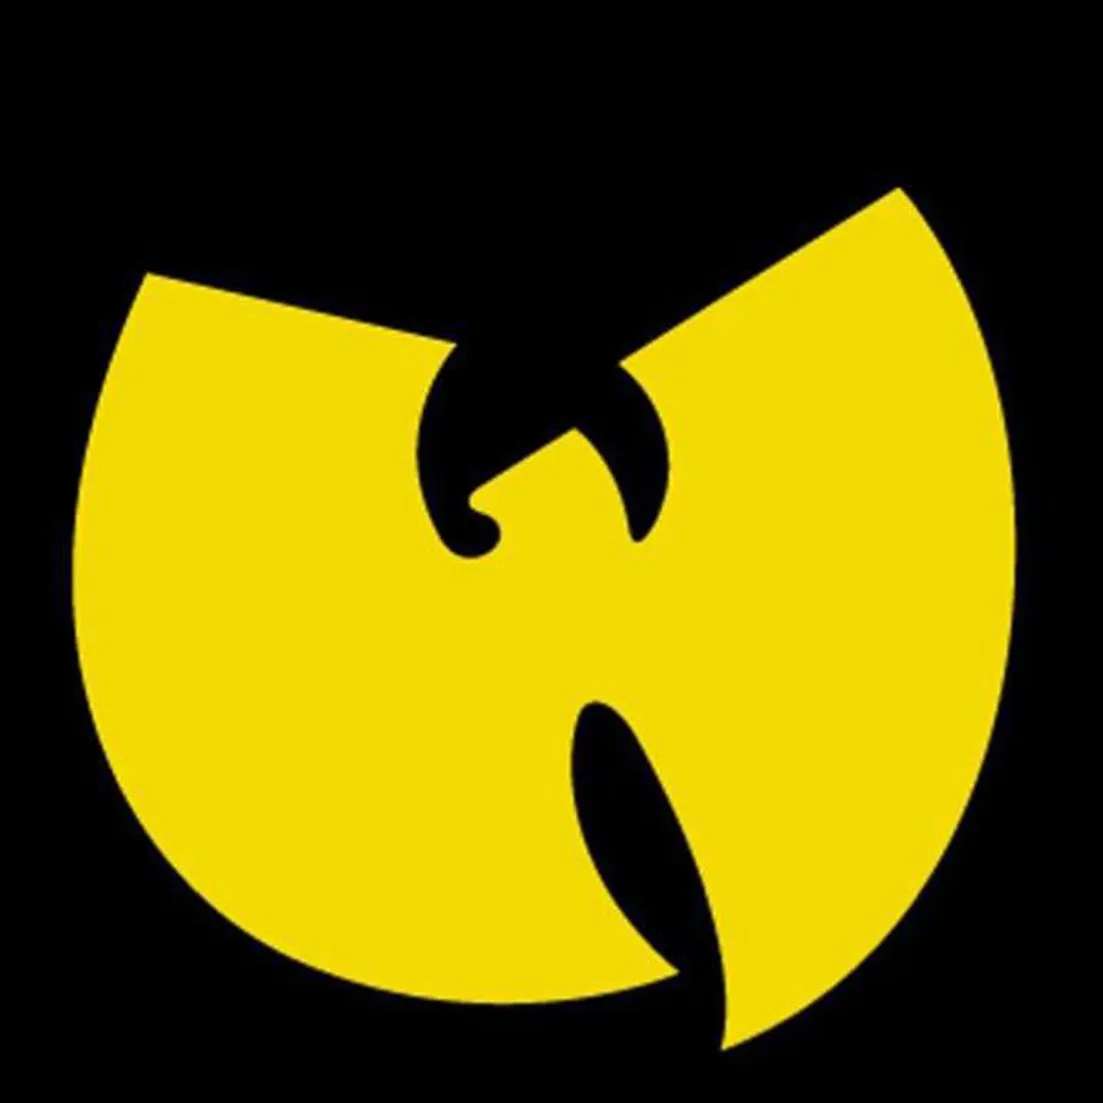 Wu-Tang Clan Tour Dates, Tickets, & Live Streams